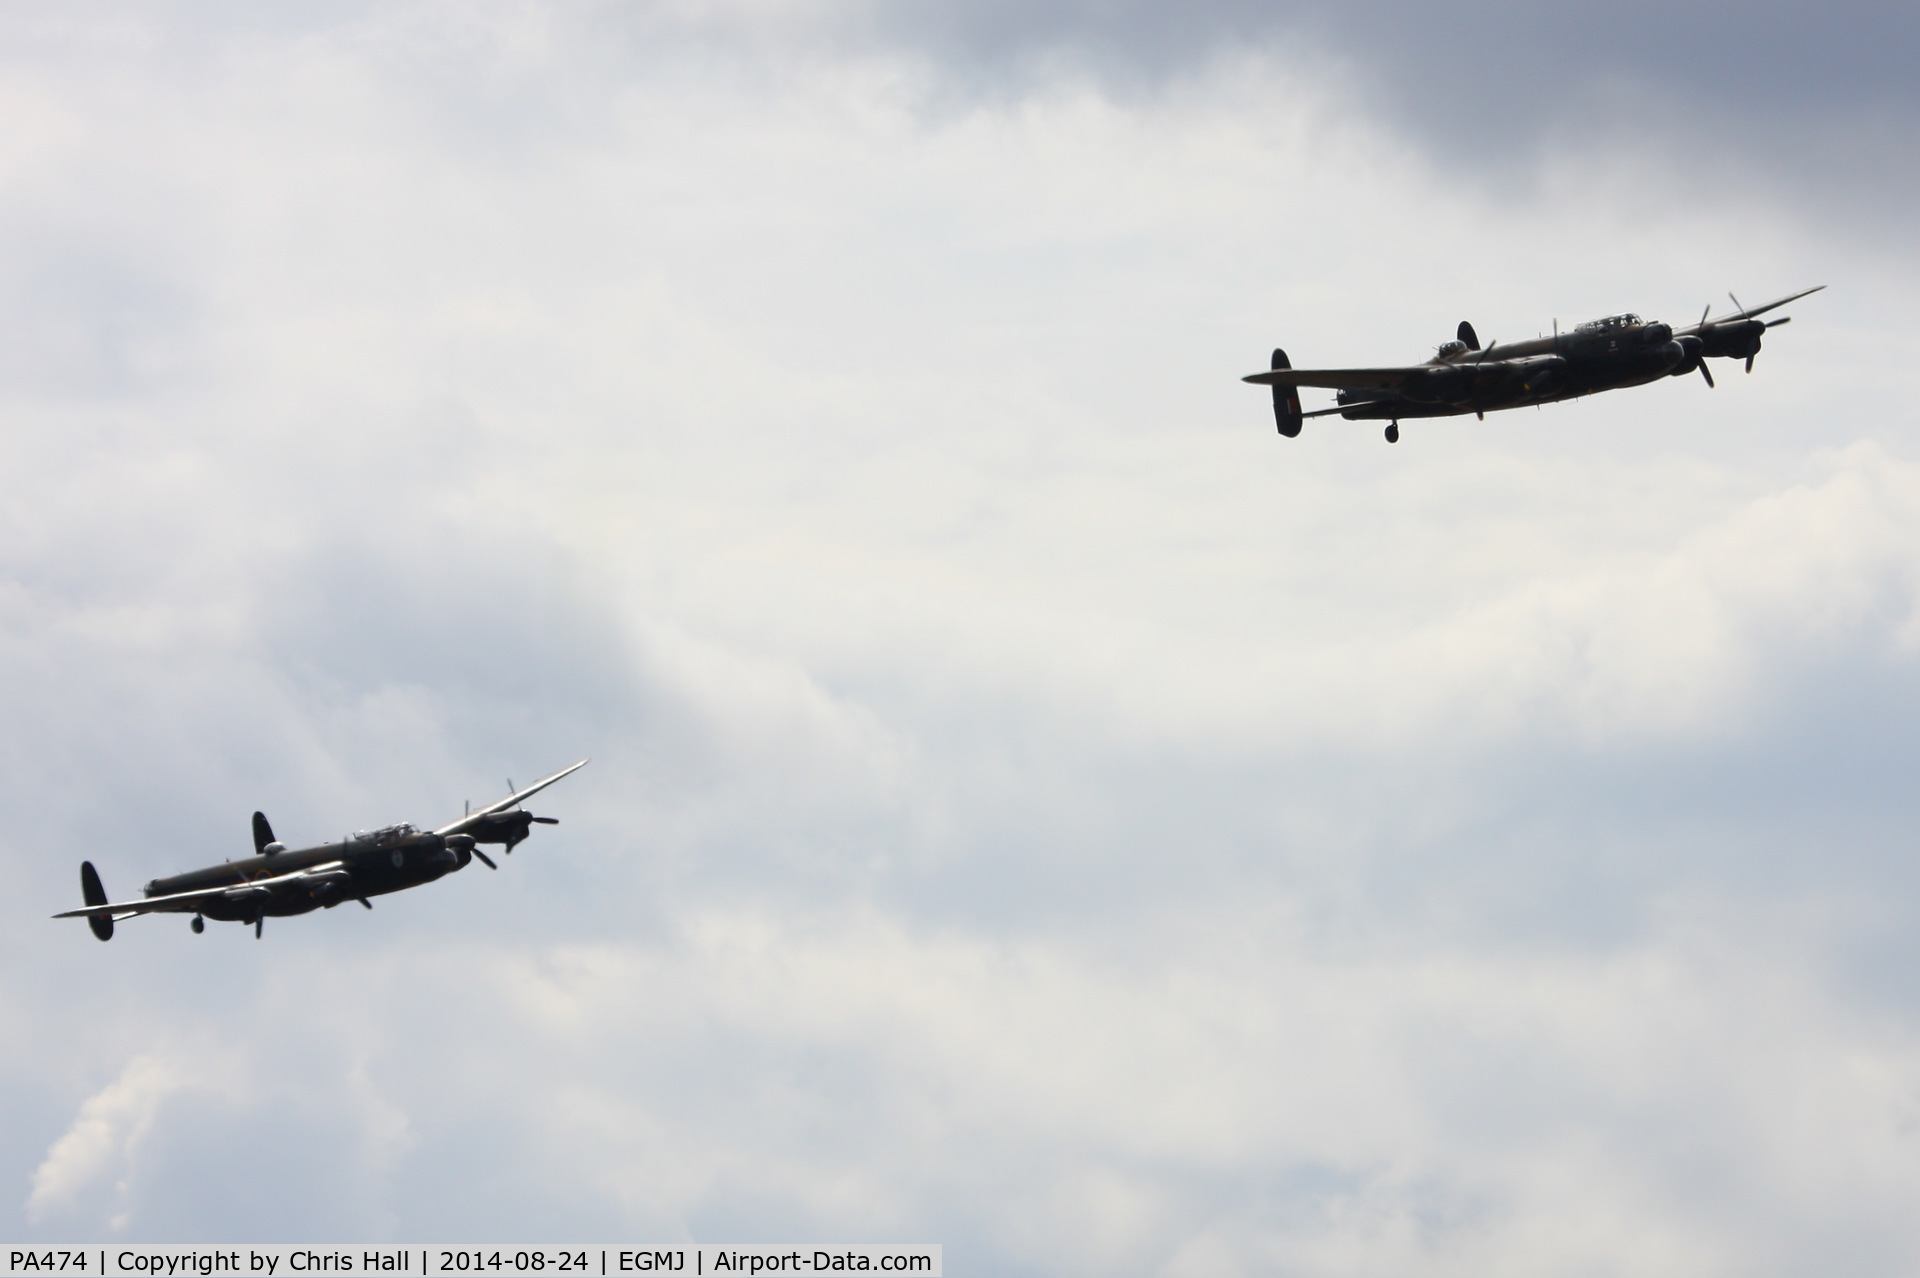 PA474, 1945 Avro 683 Lancaster B1 C/N VACH0052/D2973, in formation with C-GVRA at the Little Gransden Airshow 2014